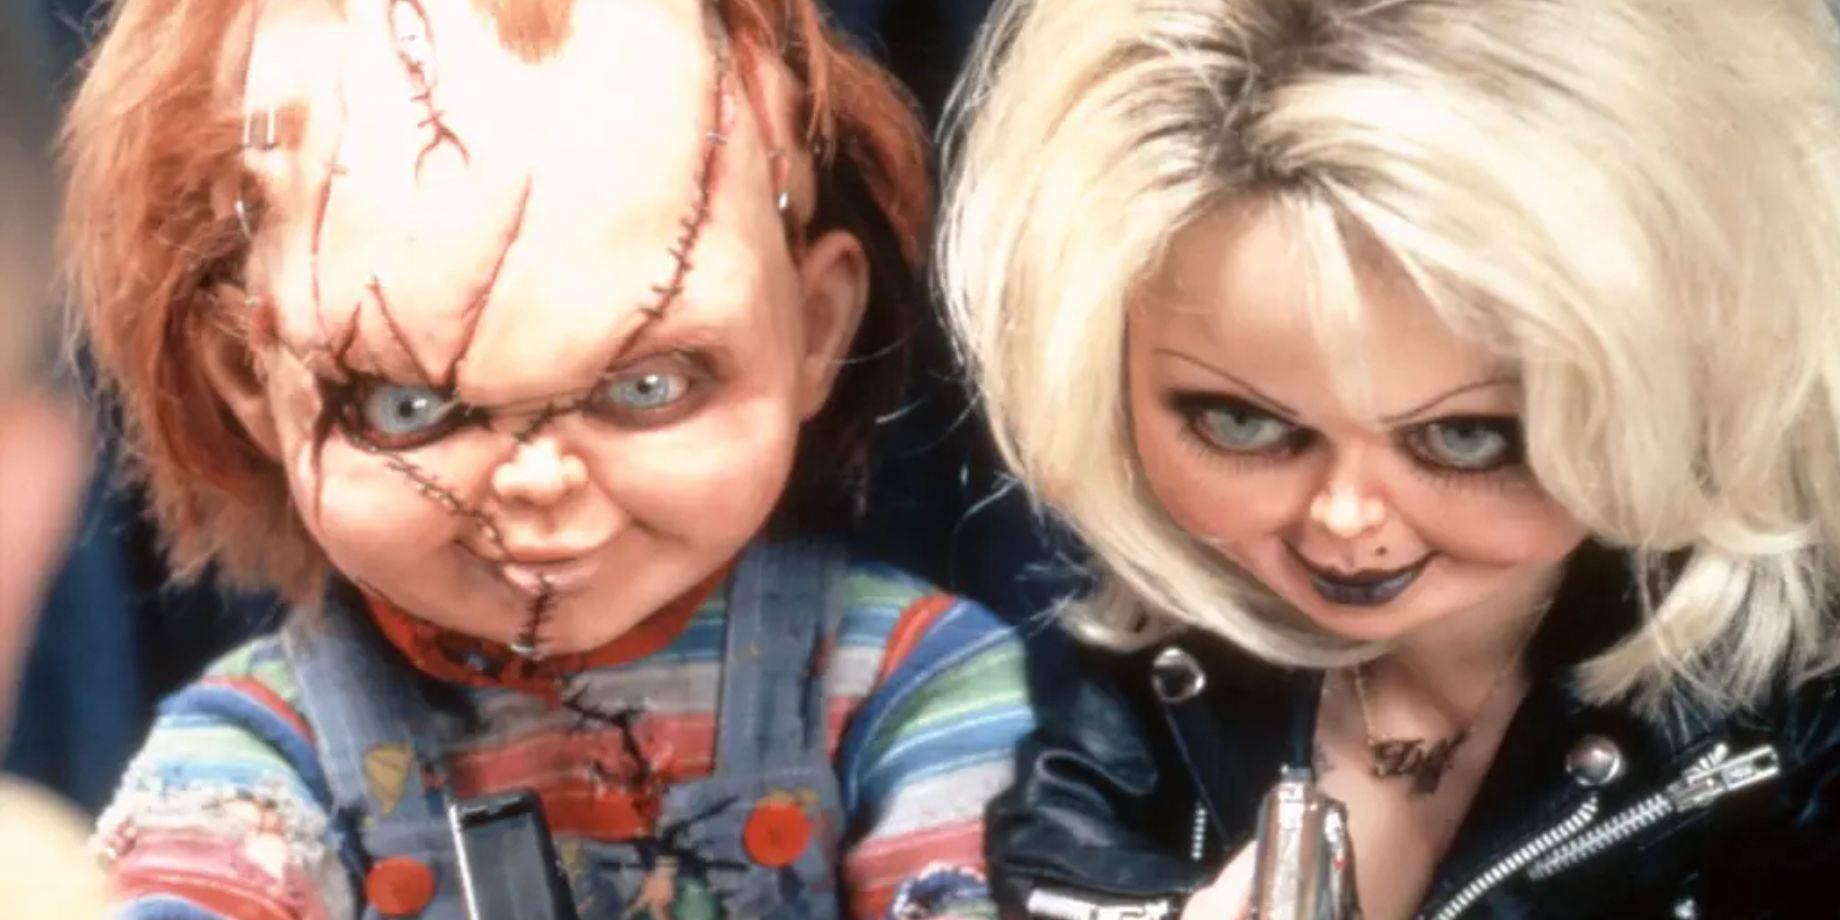 Chucky and Tiffany dolls in Seed of Chucky